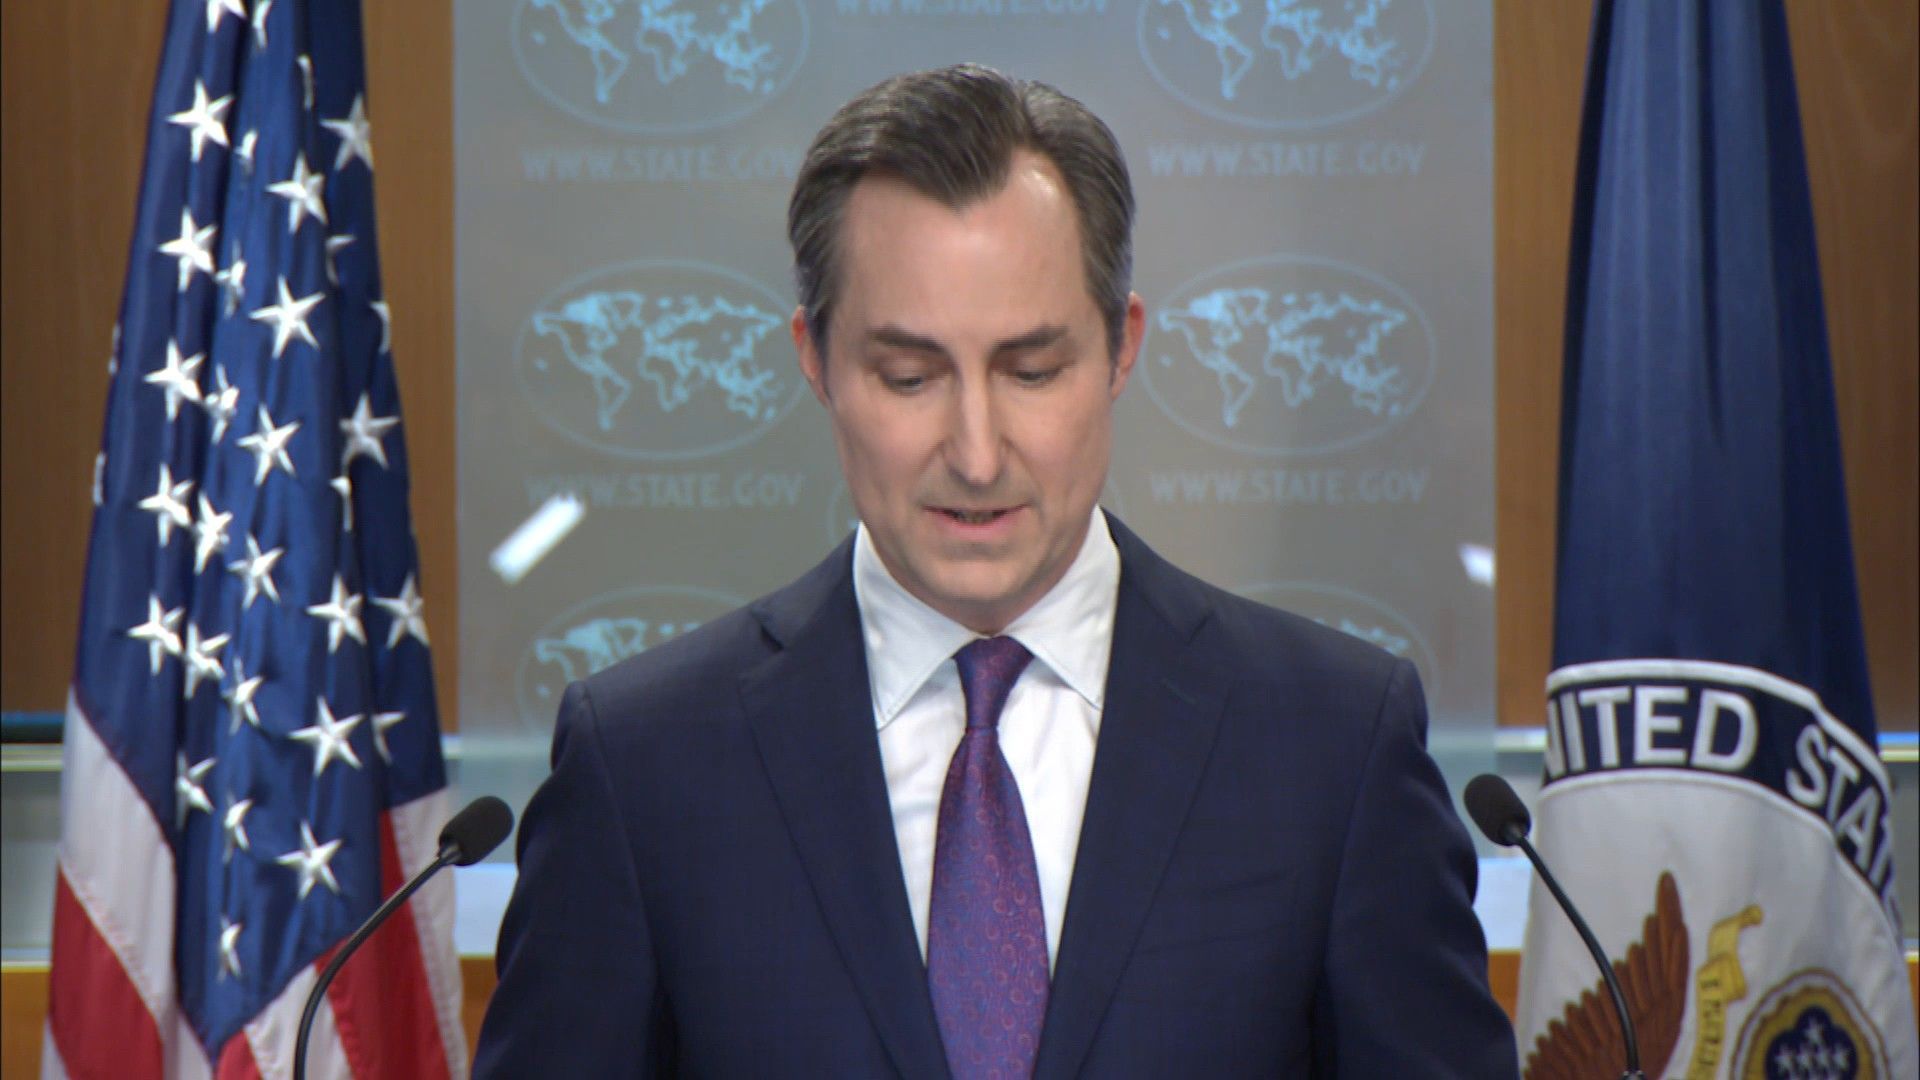 US rejects ICC's equivalence of Hamas and Israel: State Dept